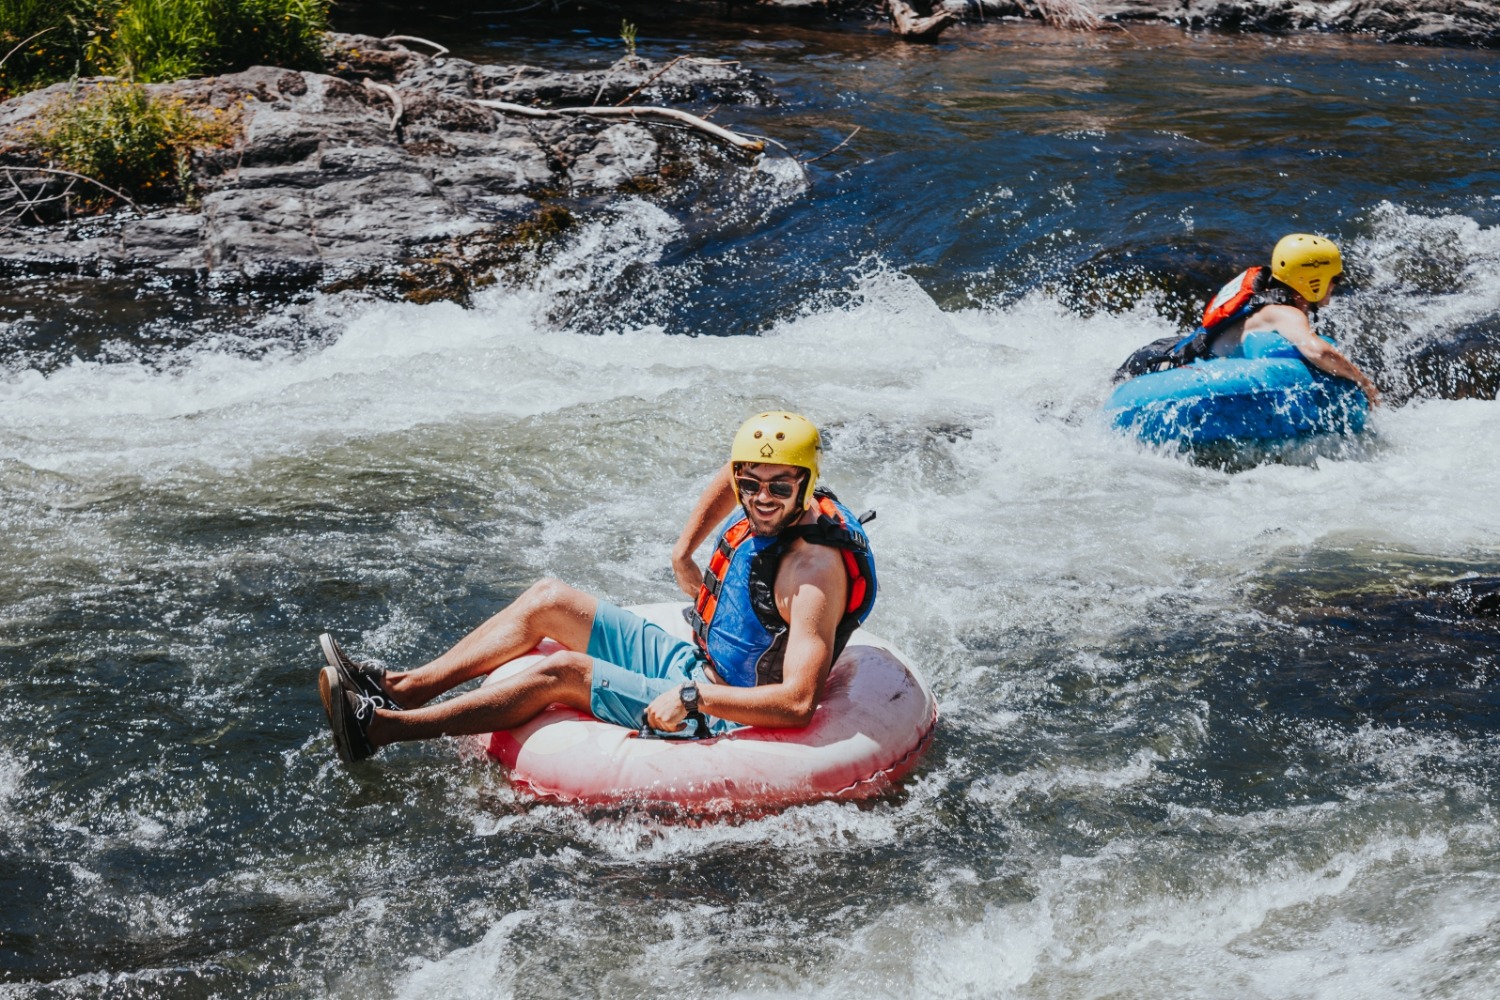 Water activities on the Rogue River, tubing, Rafting, white water rafting, American white water expedition, adventure, things to do